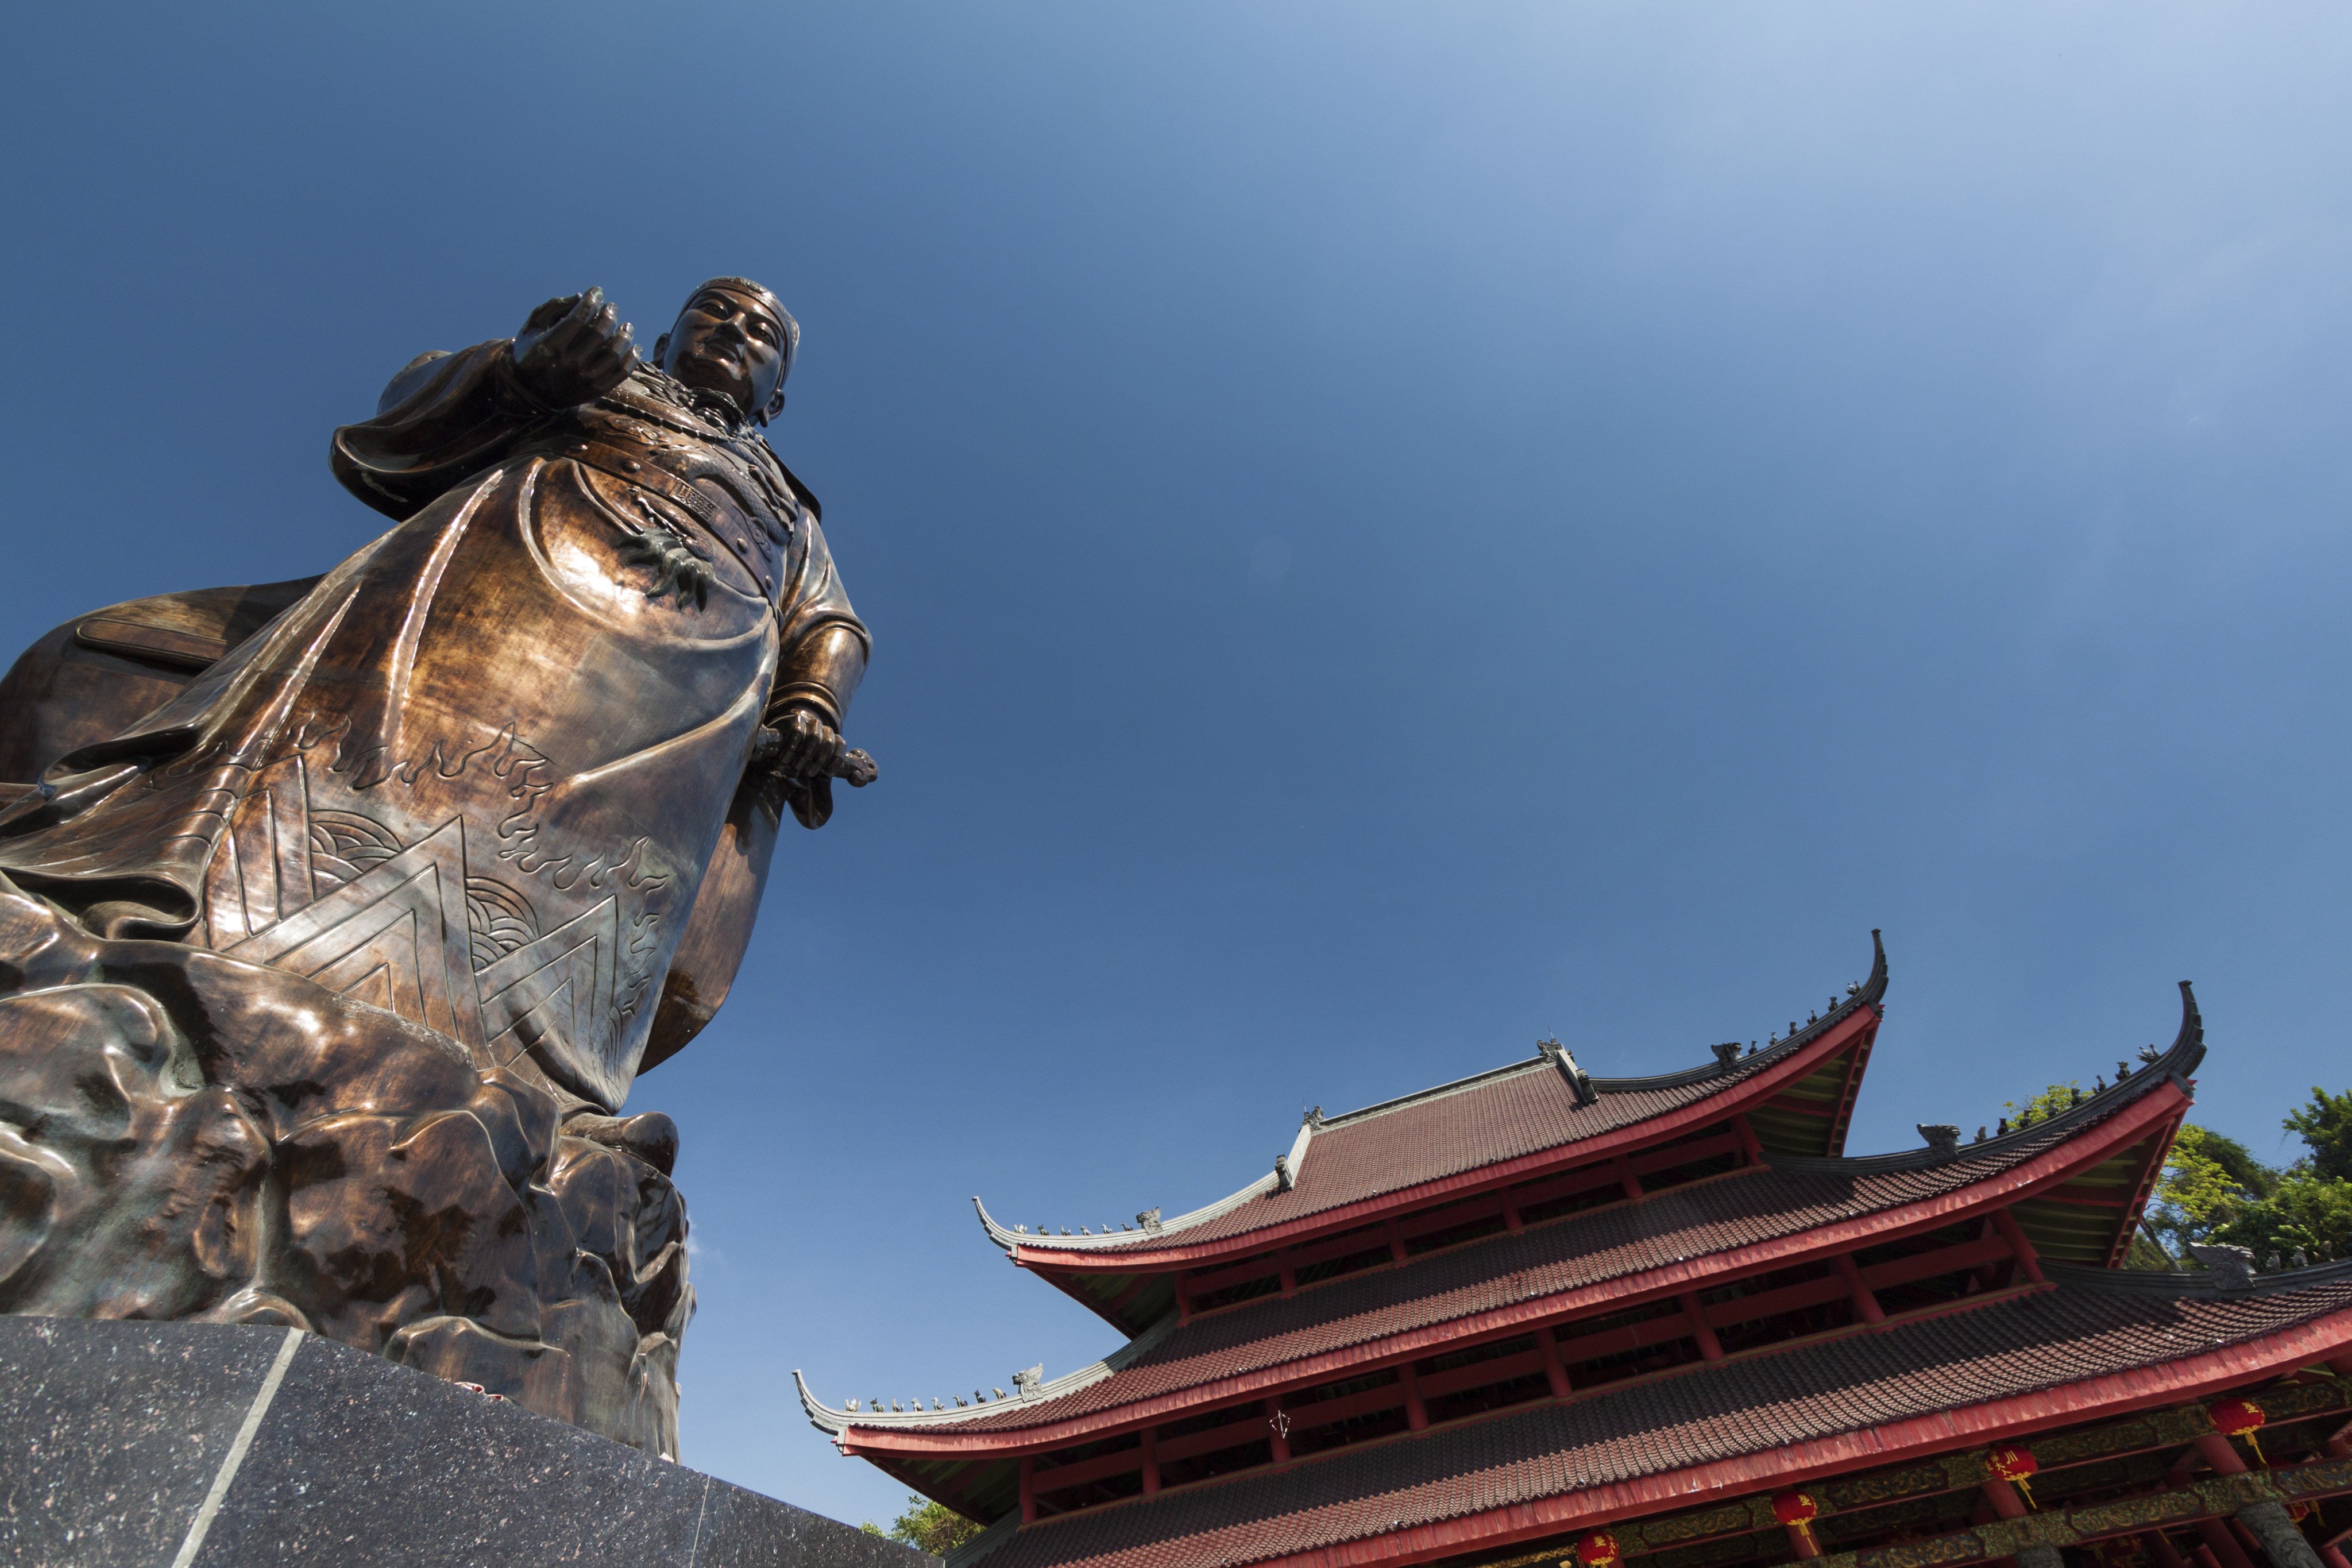 A statue of Zheng He at the Sam Poo Kong temple in Semarang, Central Java, Indonesia. Photo: Shutterstock